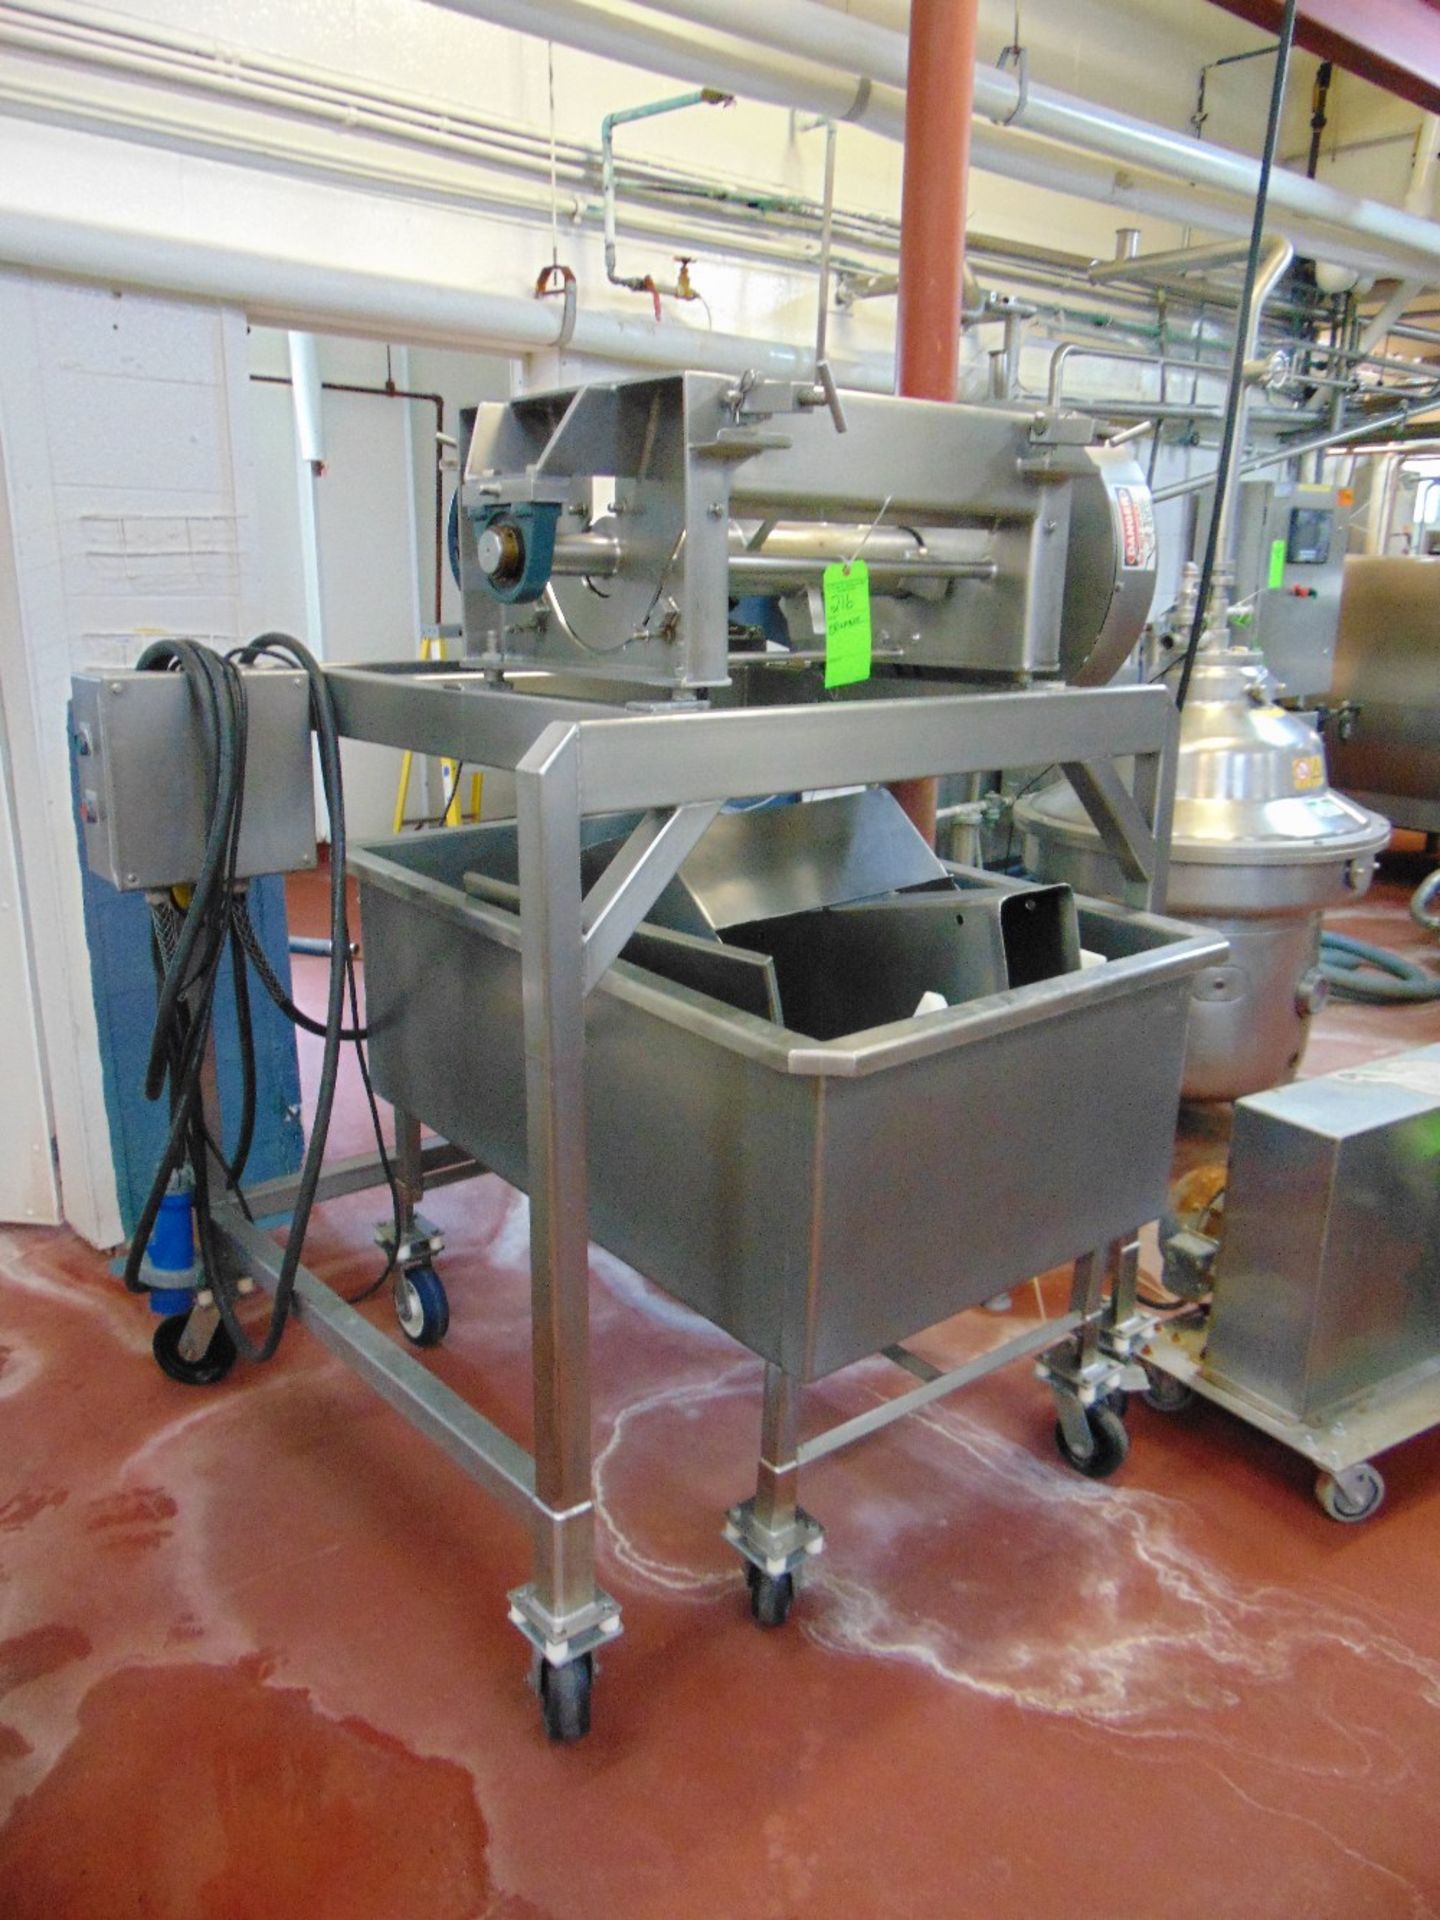 All S/S Sanitary Cheese Crumbling Machine with 20 HP Motor; Includes Feed Hopper, Guards and Several